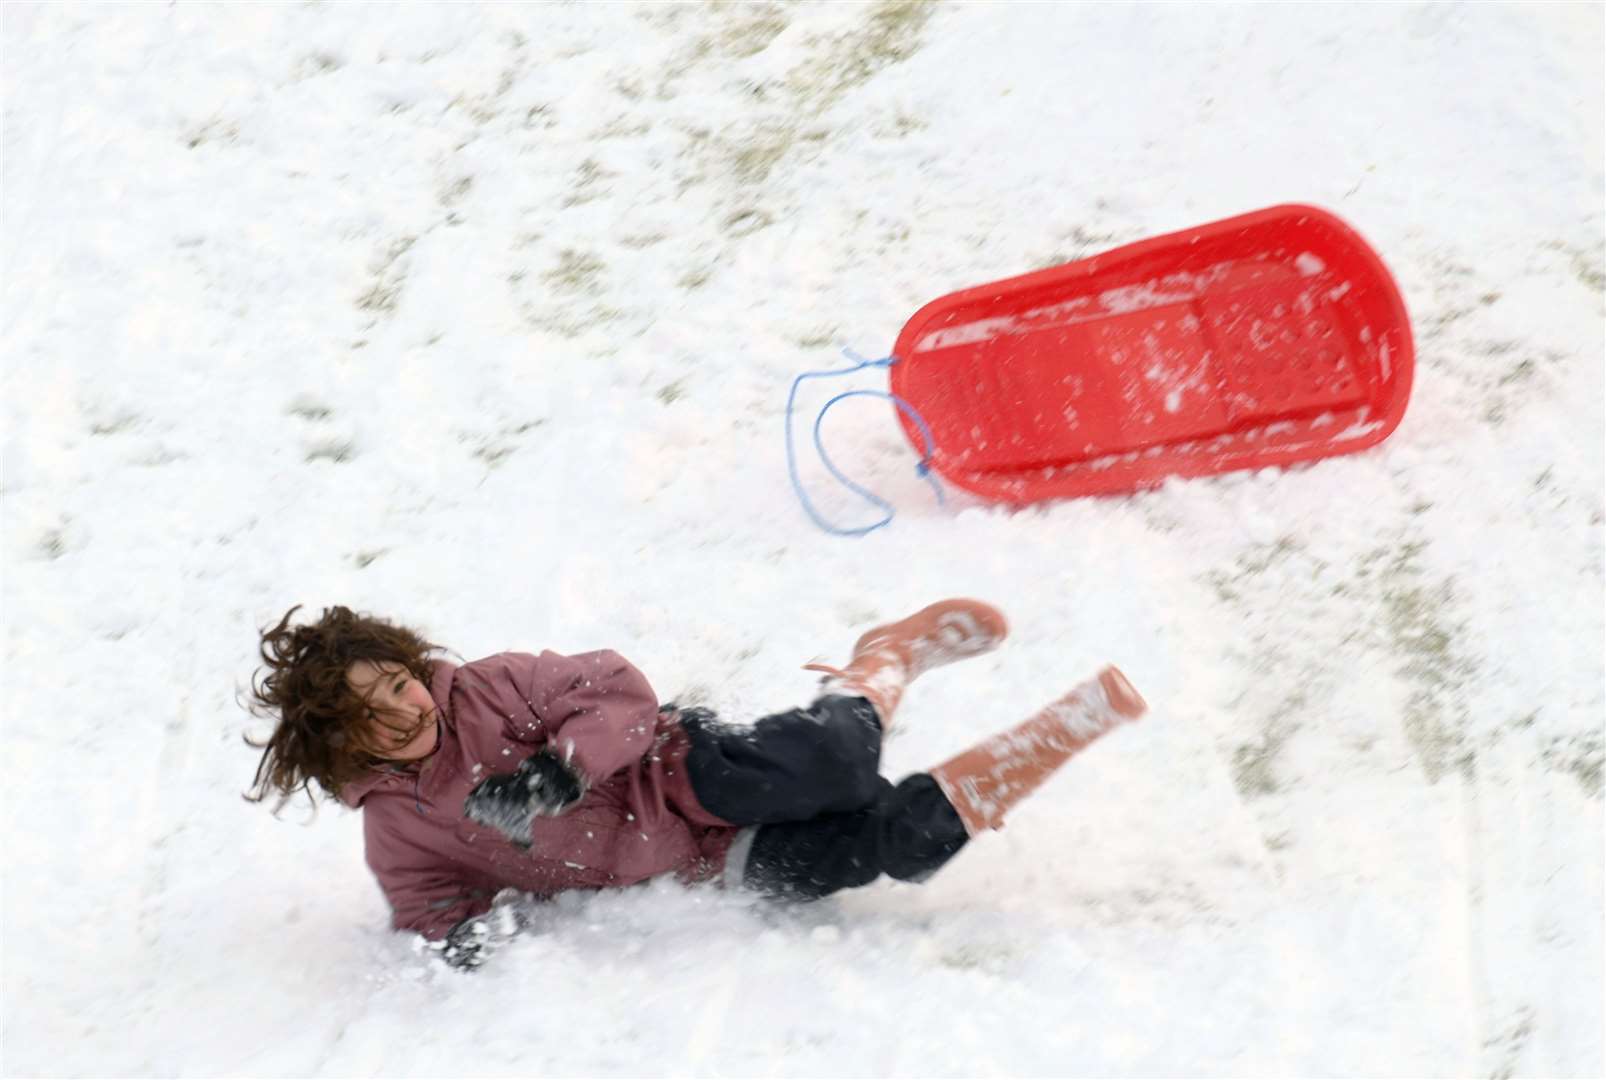 Falling off the sledge. Picture: James Mackenzie.